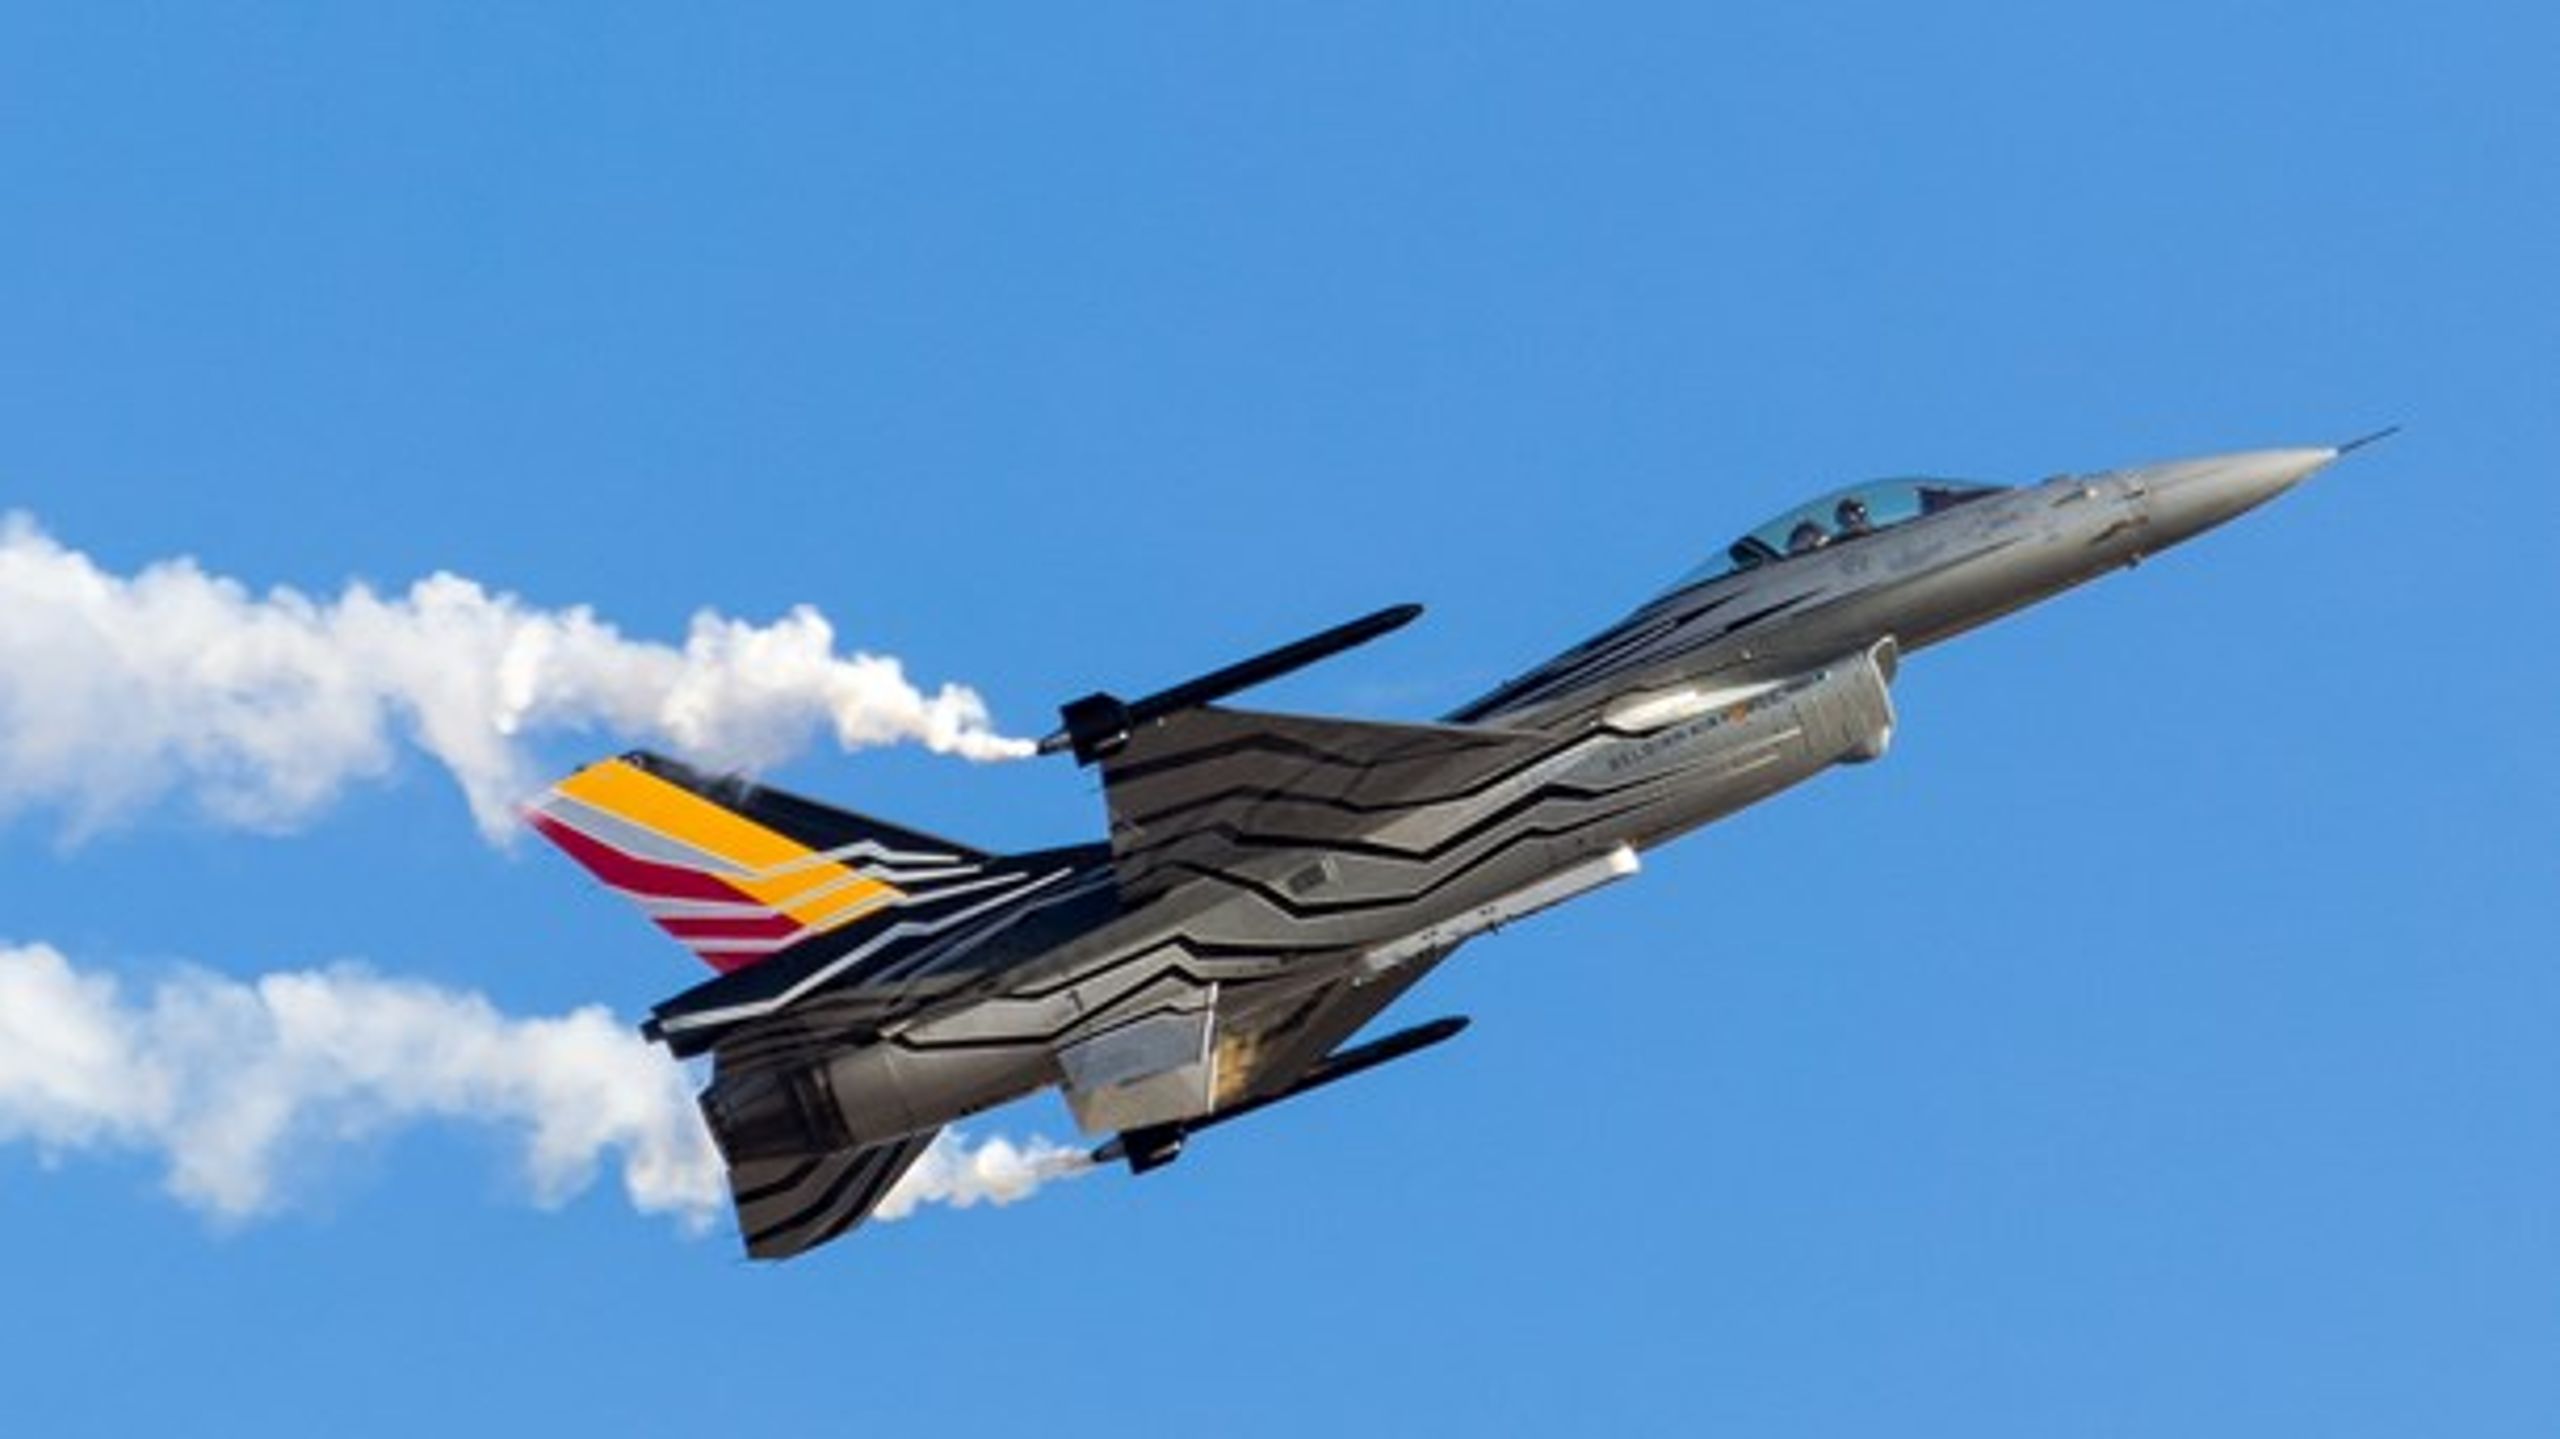 Belgisk F-16 fly ved airshow.